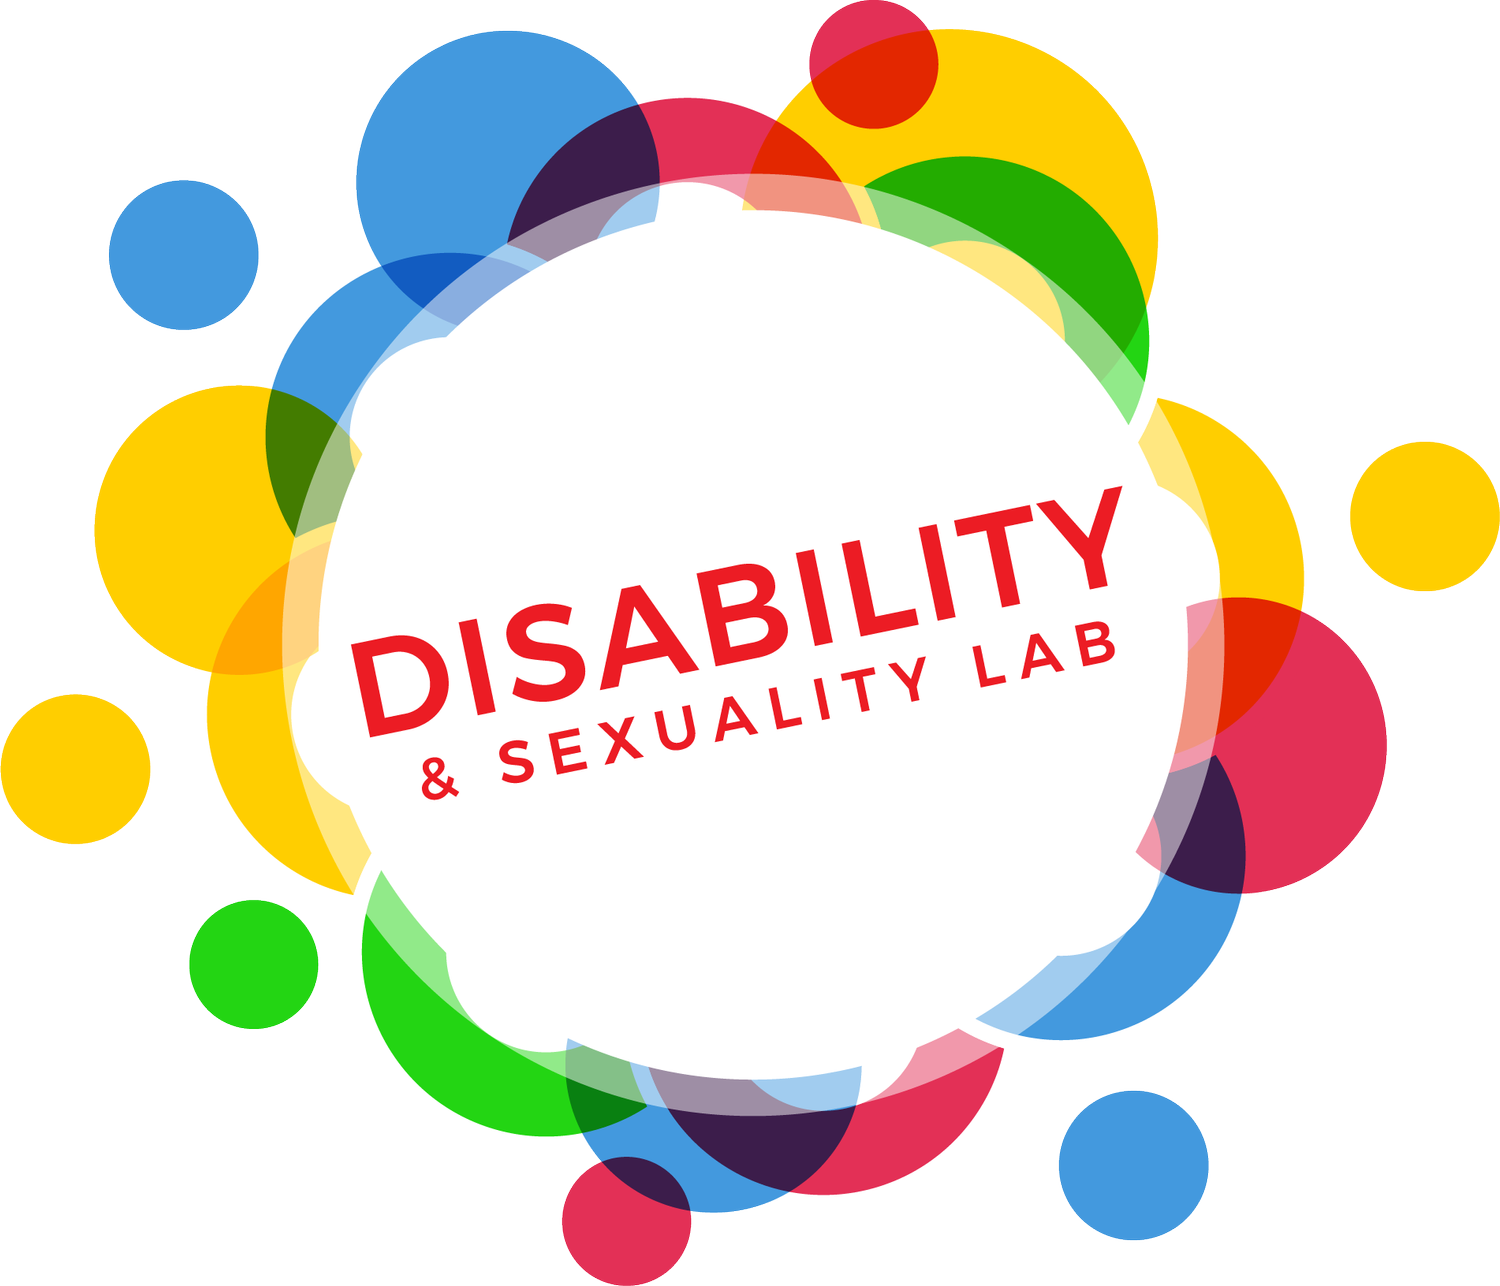 Disability &amp; Sexuality Lab